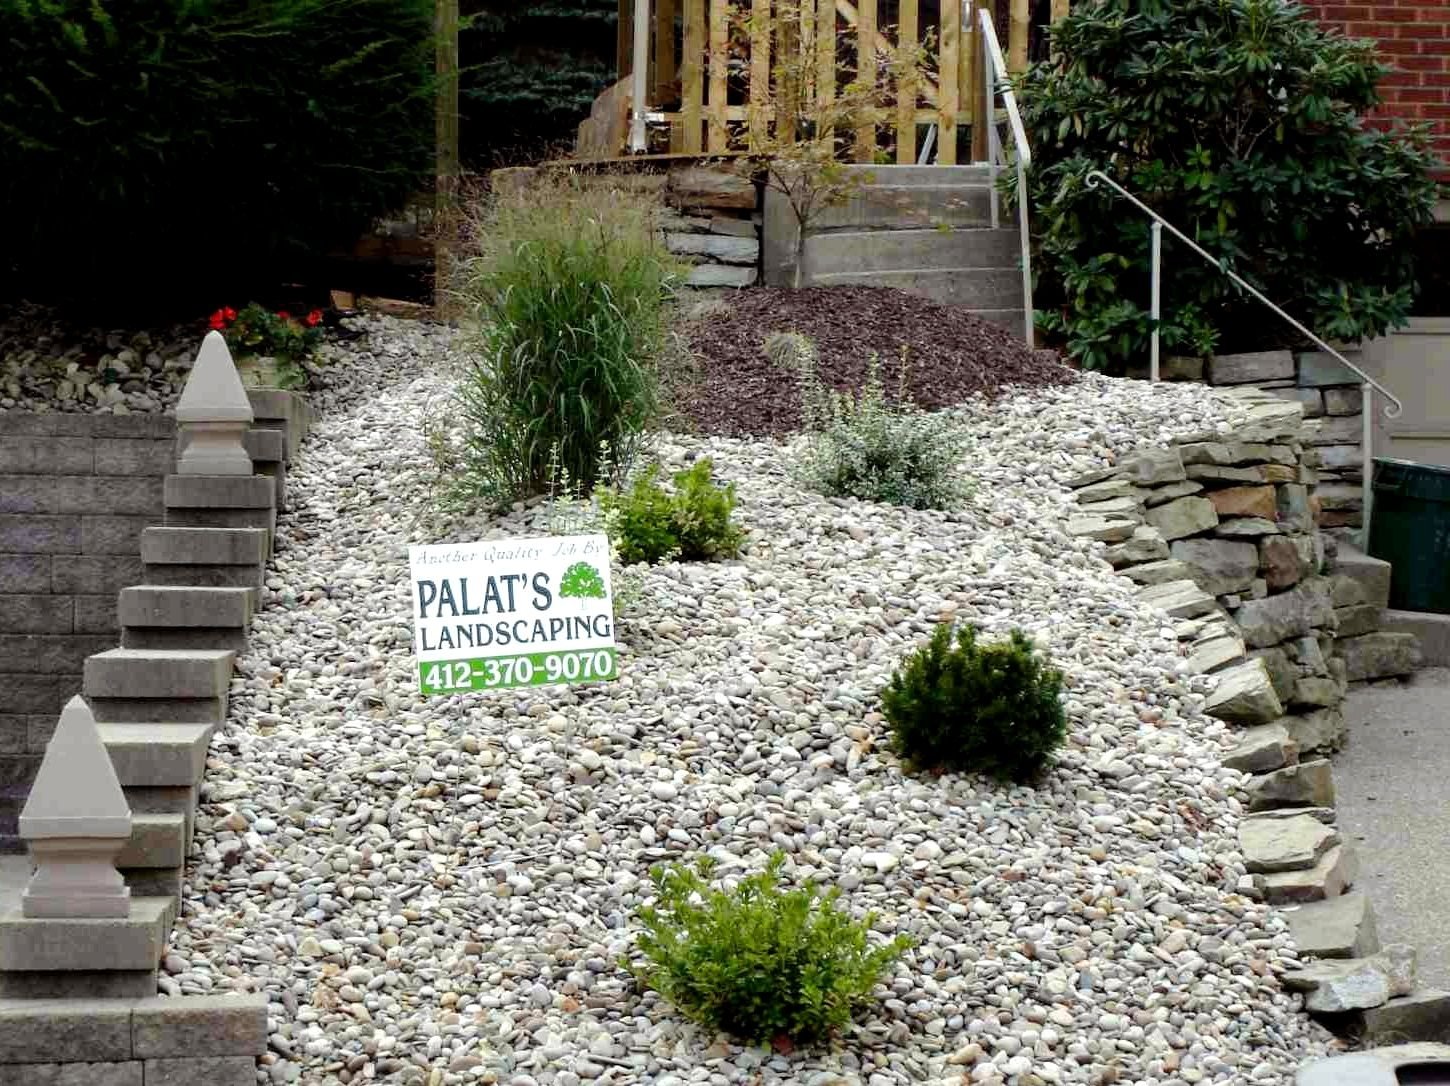 10 Fabulous Landscaping Ideas Using Rocks And Stones 2023 - Front YarD LanDscaping IDeas With Stones Using Rocks AnD Small